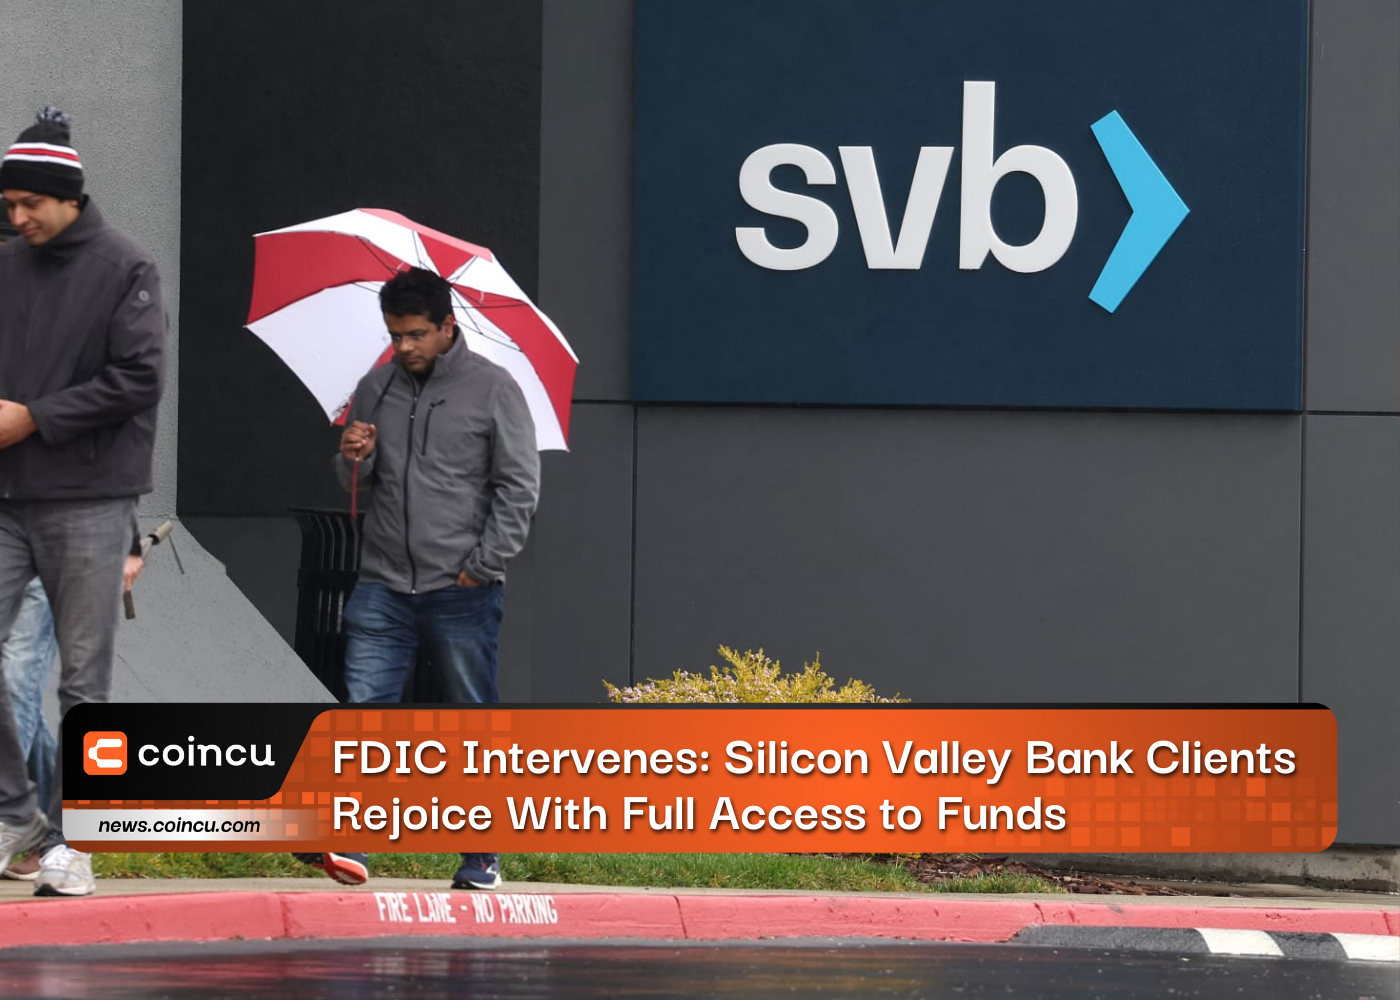 FDIC Intervenes: Silicon Valley Bank Clients Rejoice With Full Access To Funds